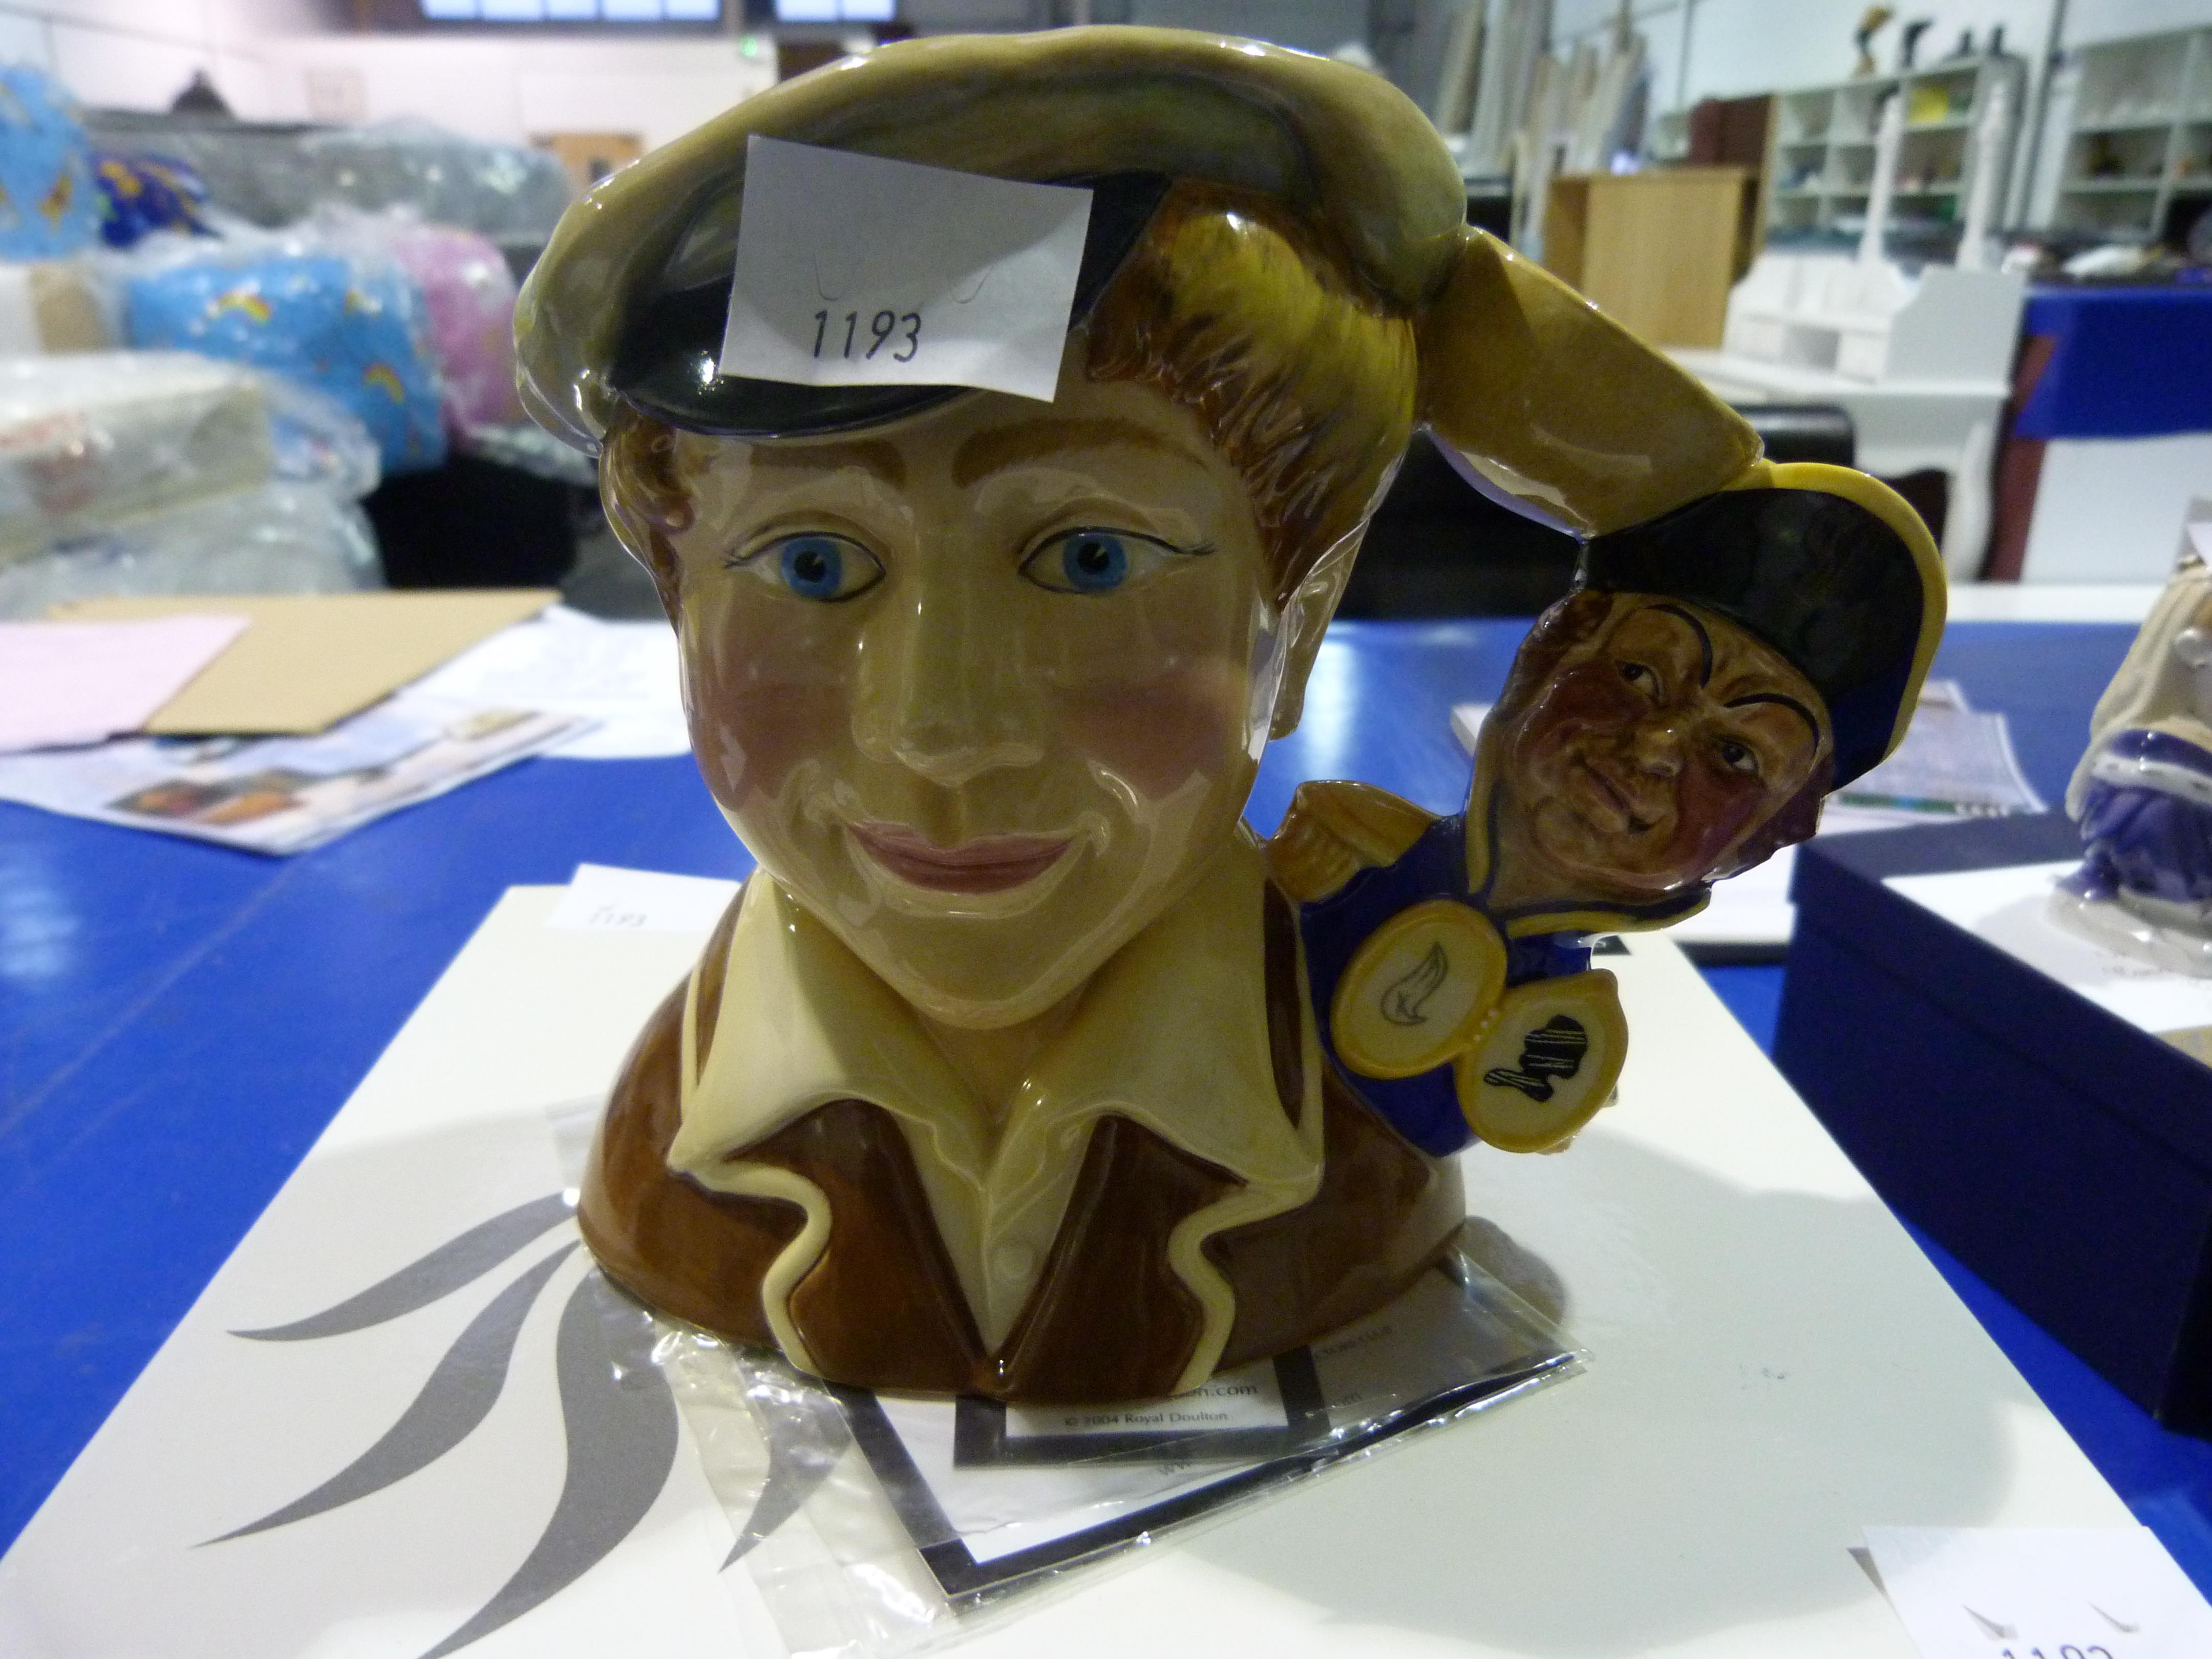 This is a Timed Online Auction on Bidspotter.co.uk, Click here to bid. Royal Doulton character - Image 2 of 5